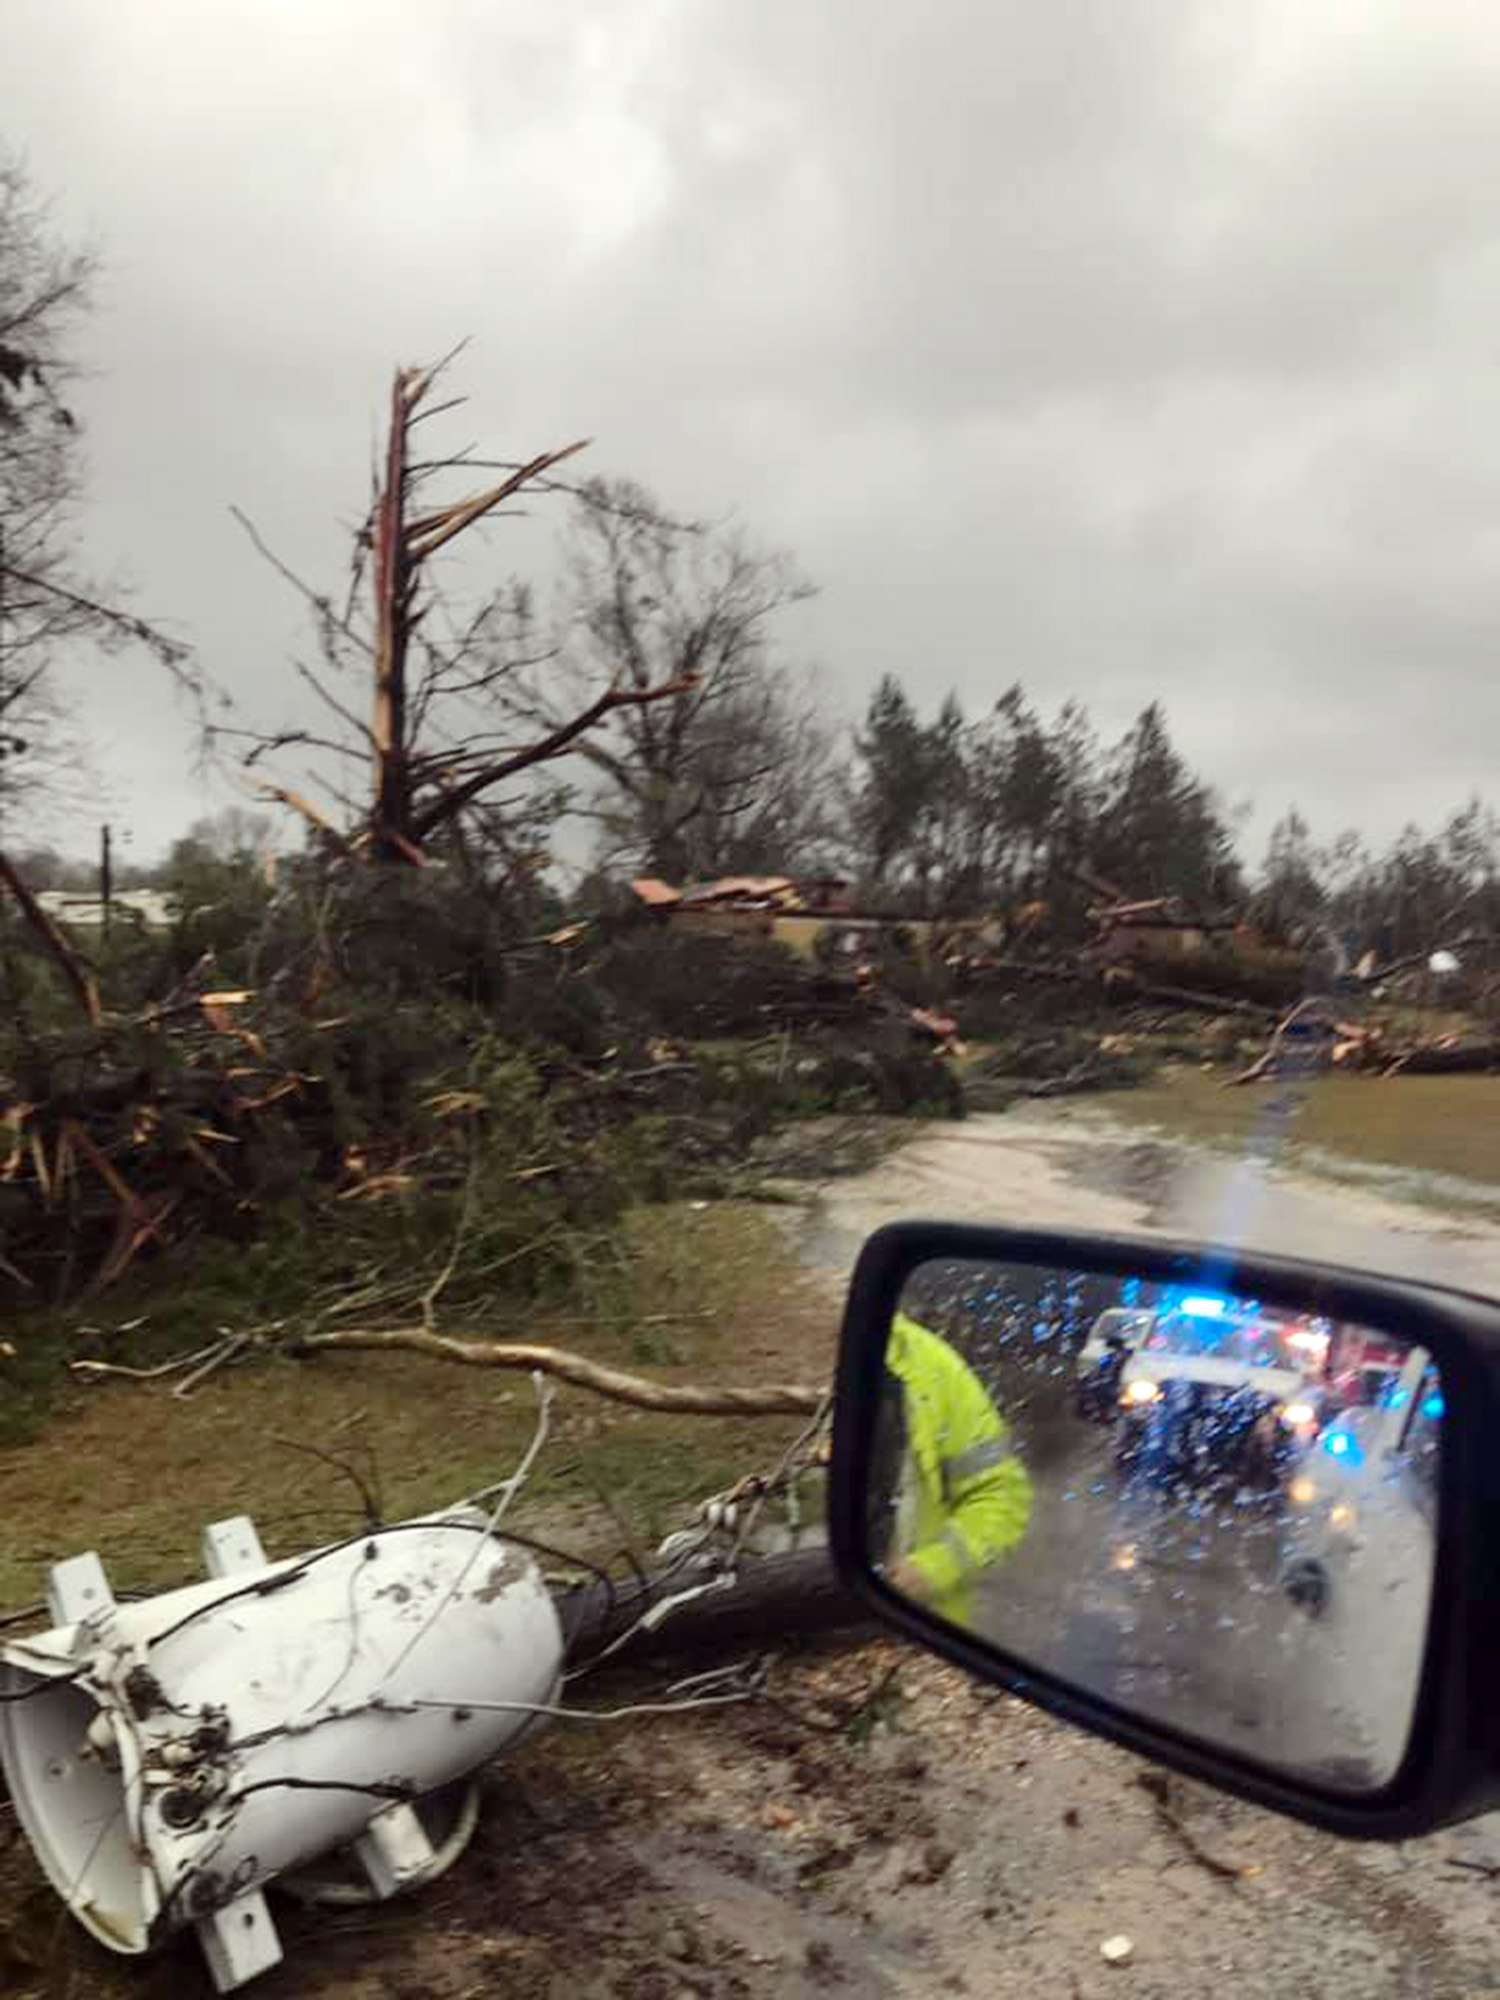 PHOTO: Storm damage is pictured in a photo posted to social media by the Vernon Parish Sheriff's Department, Dec. 16, 2019.